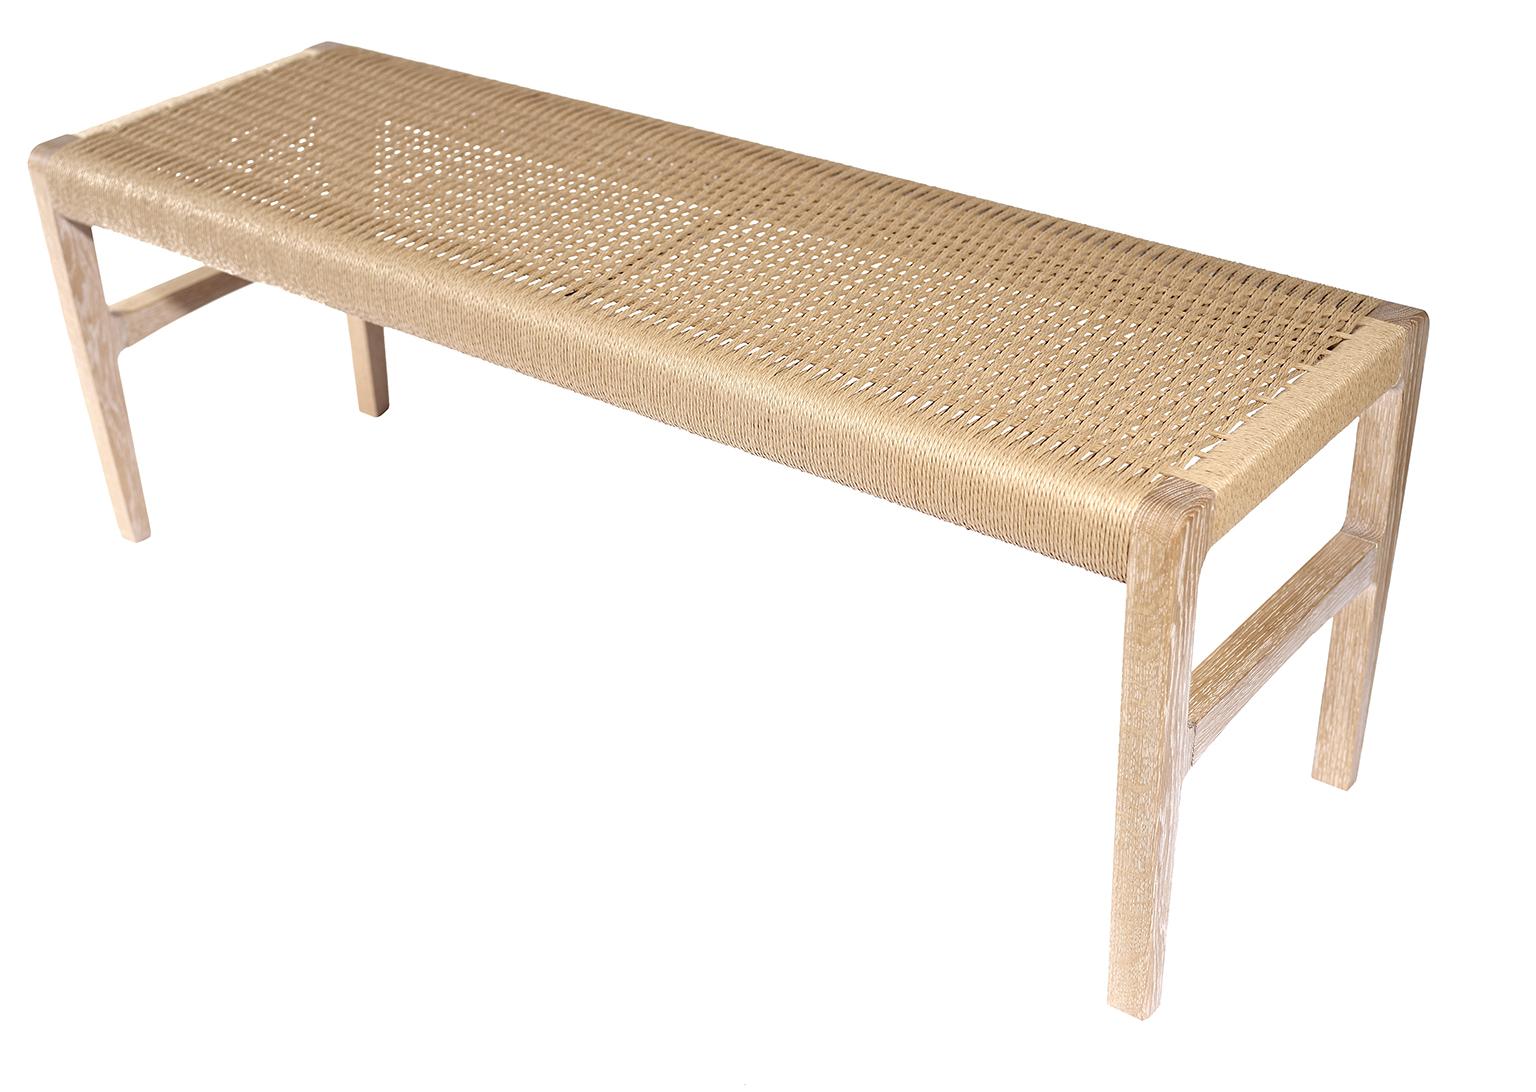 A bench with subtle curves (shown in cerused white oak) with a woven Danish cord seat, perfect for use in the bedroom, hallway, living space or kitchen. Measures 59”.